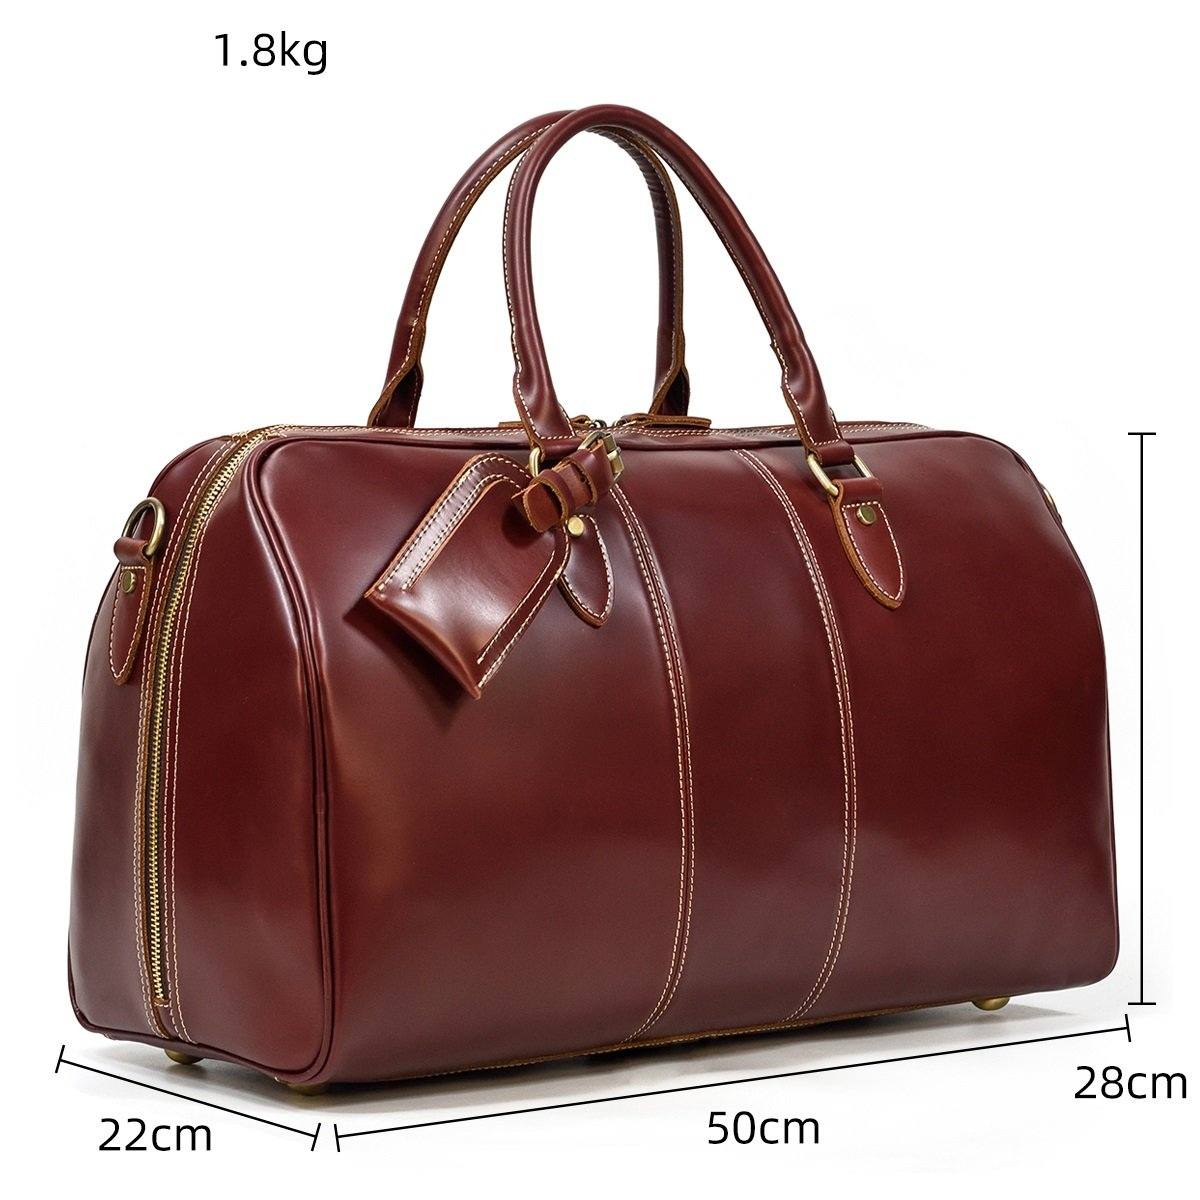 Leather duffle bag genuine leather shoulder bag green mens ladies travel  bag gym bag luggage made in Italy weekender duffle overnight bag women's